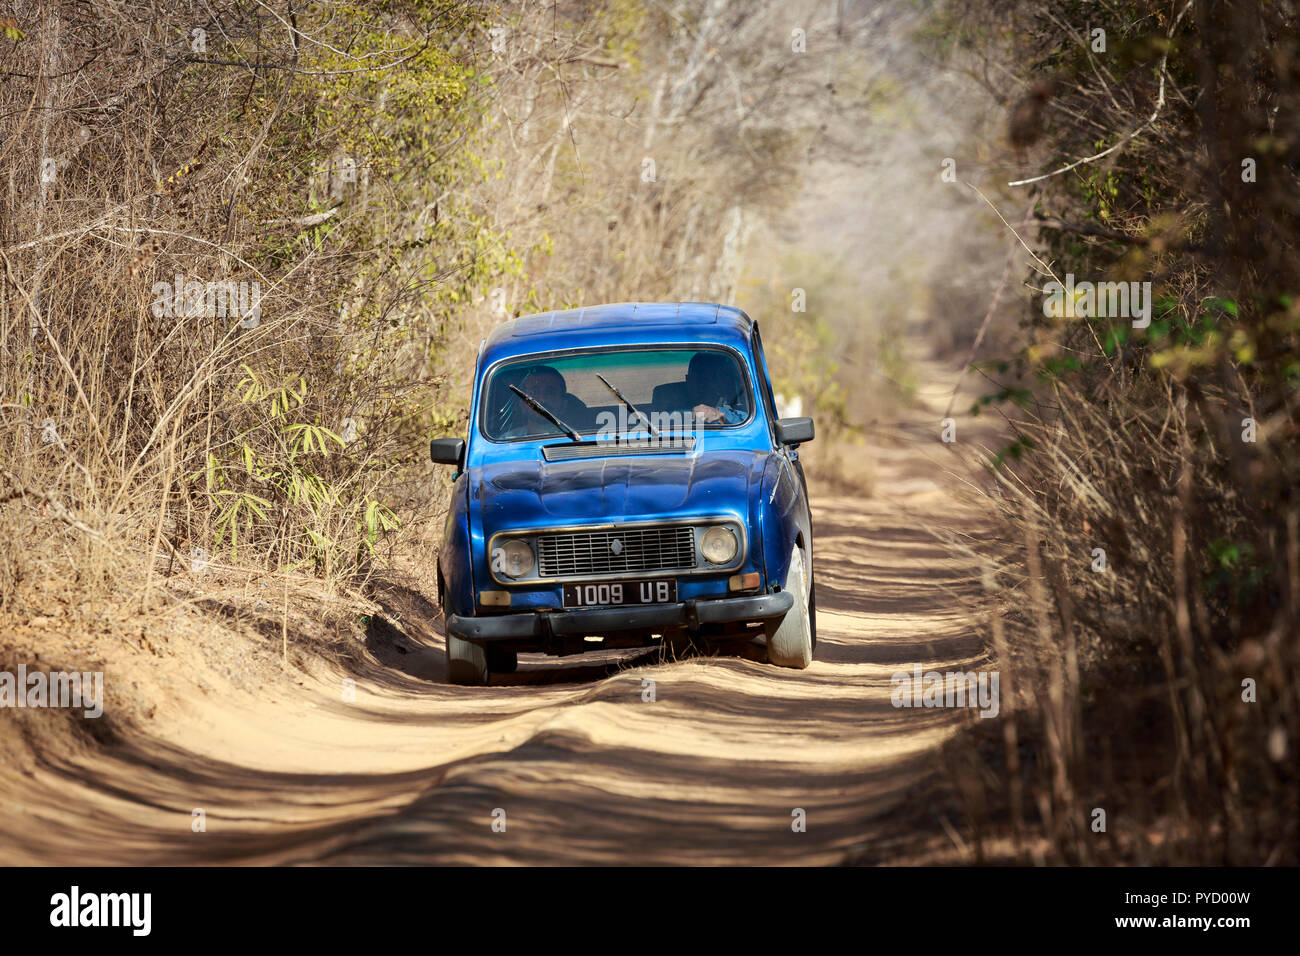 Old Renault 4 driving on a rural road in western Madagascar Stock Photo